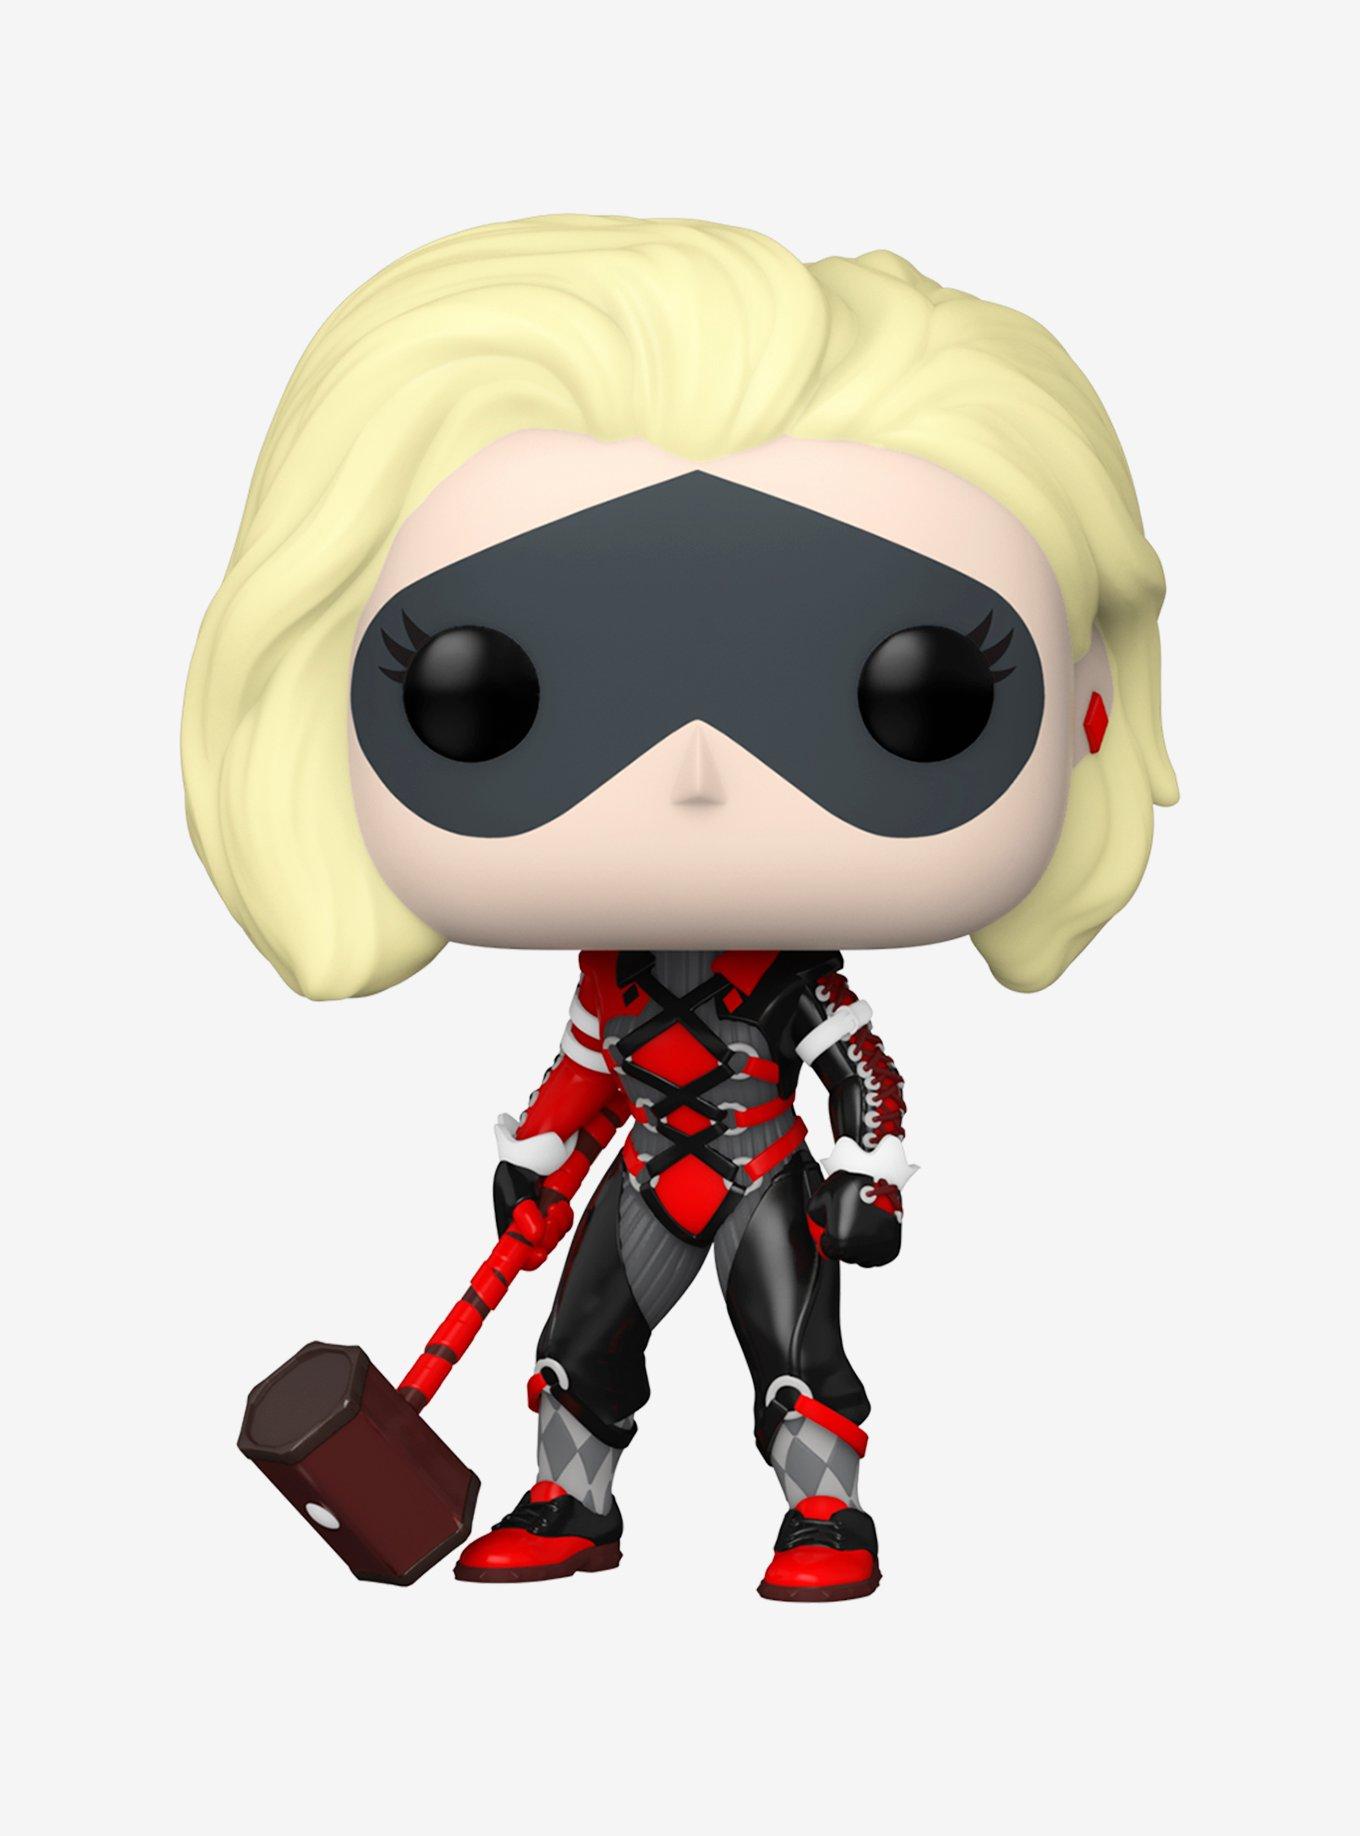 Buy Pop! Harley Quinn with Cards at Funko.